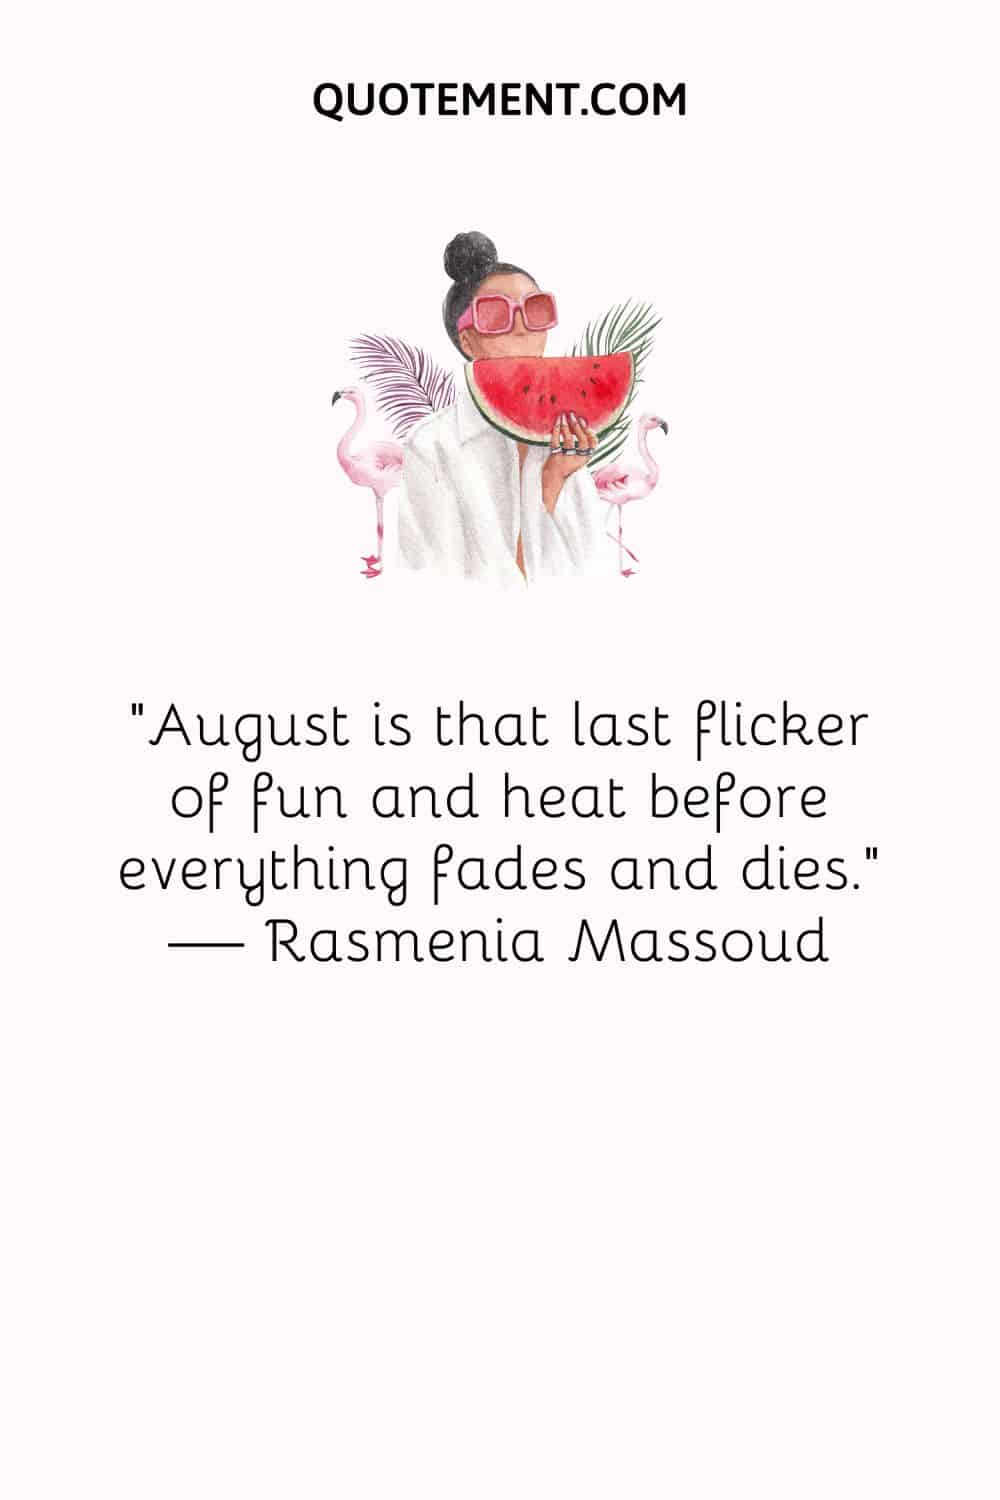 August is that last flicker of fun and heat before everything fades and dies